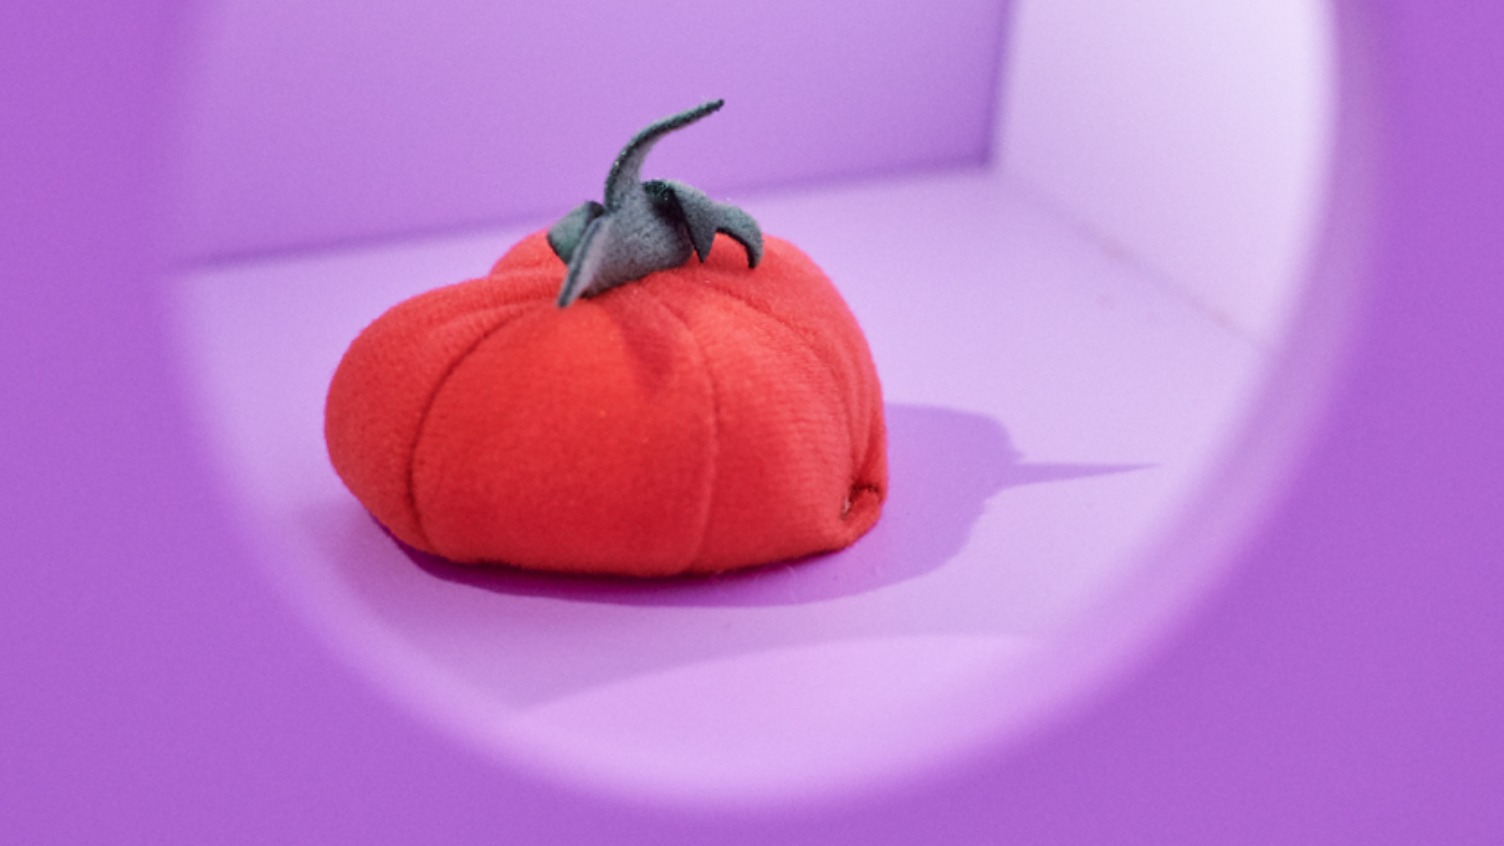 A red tomato made from fabric is seen through a lilac hole.